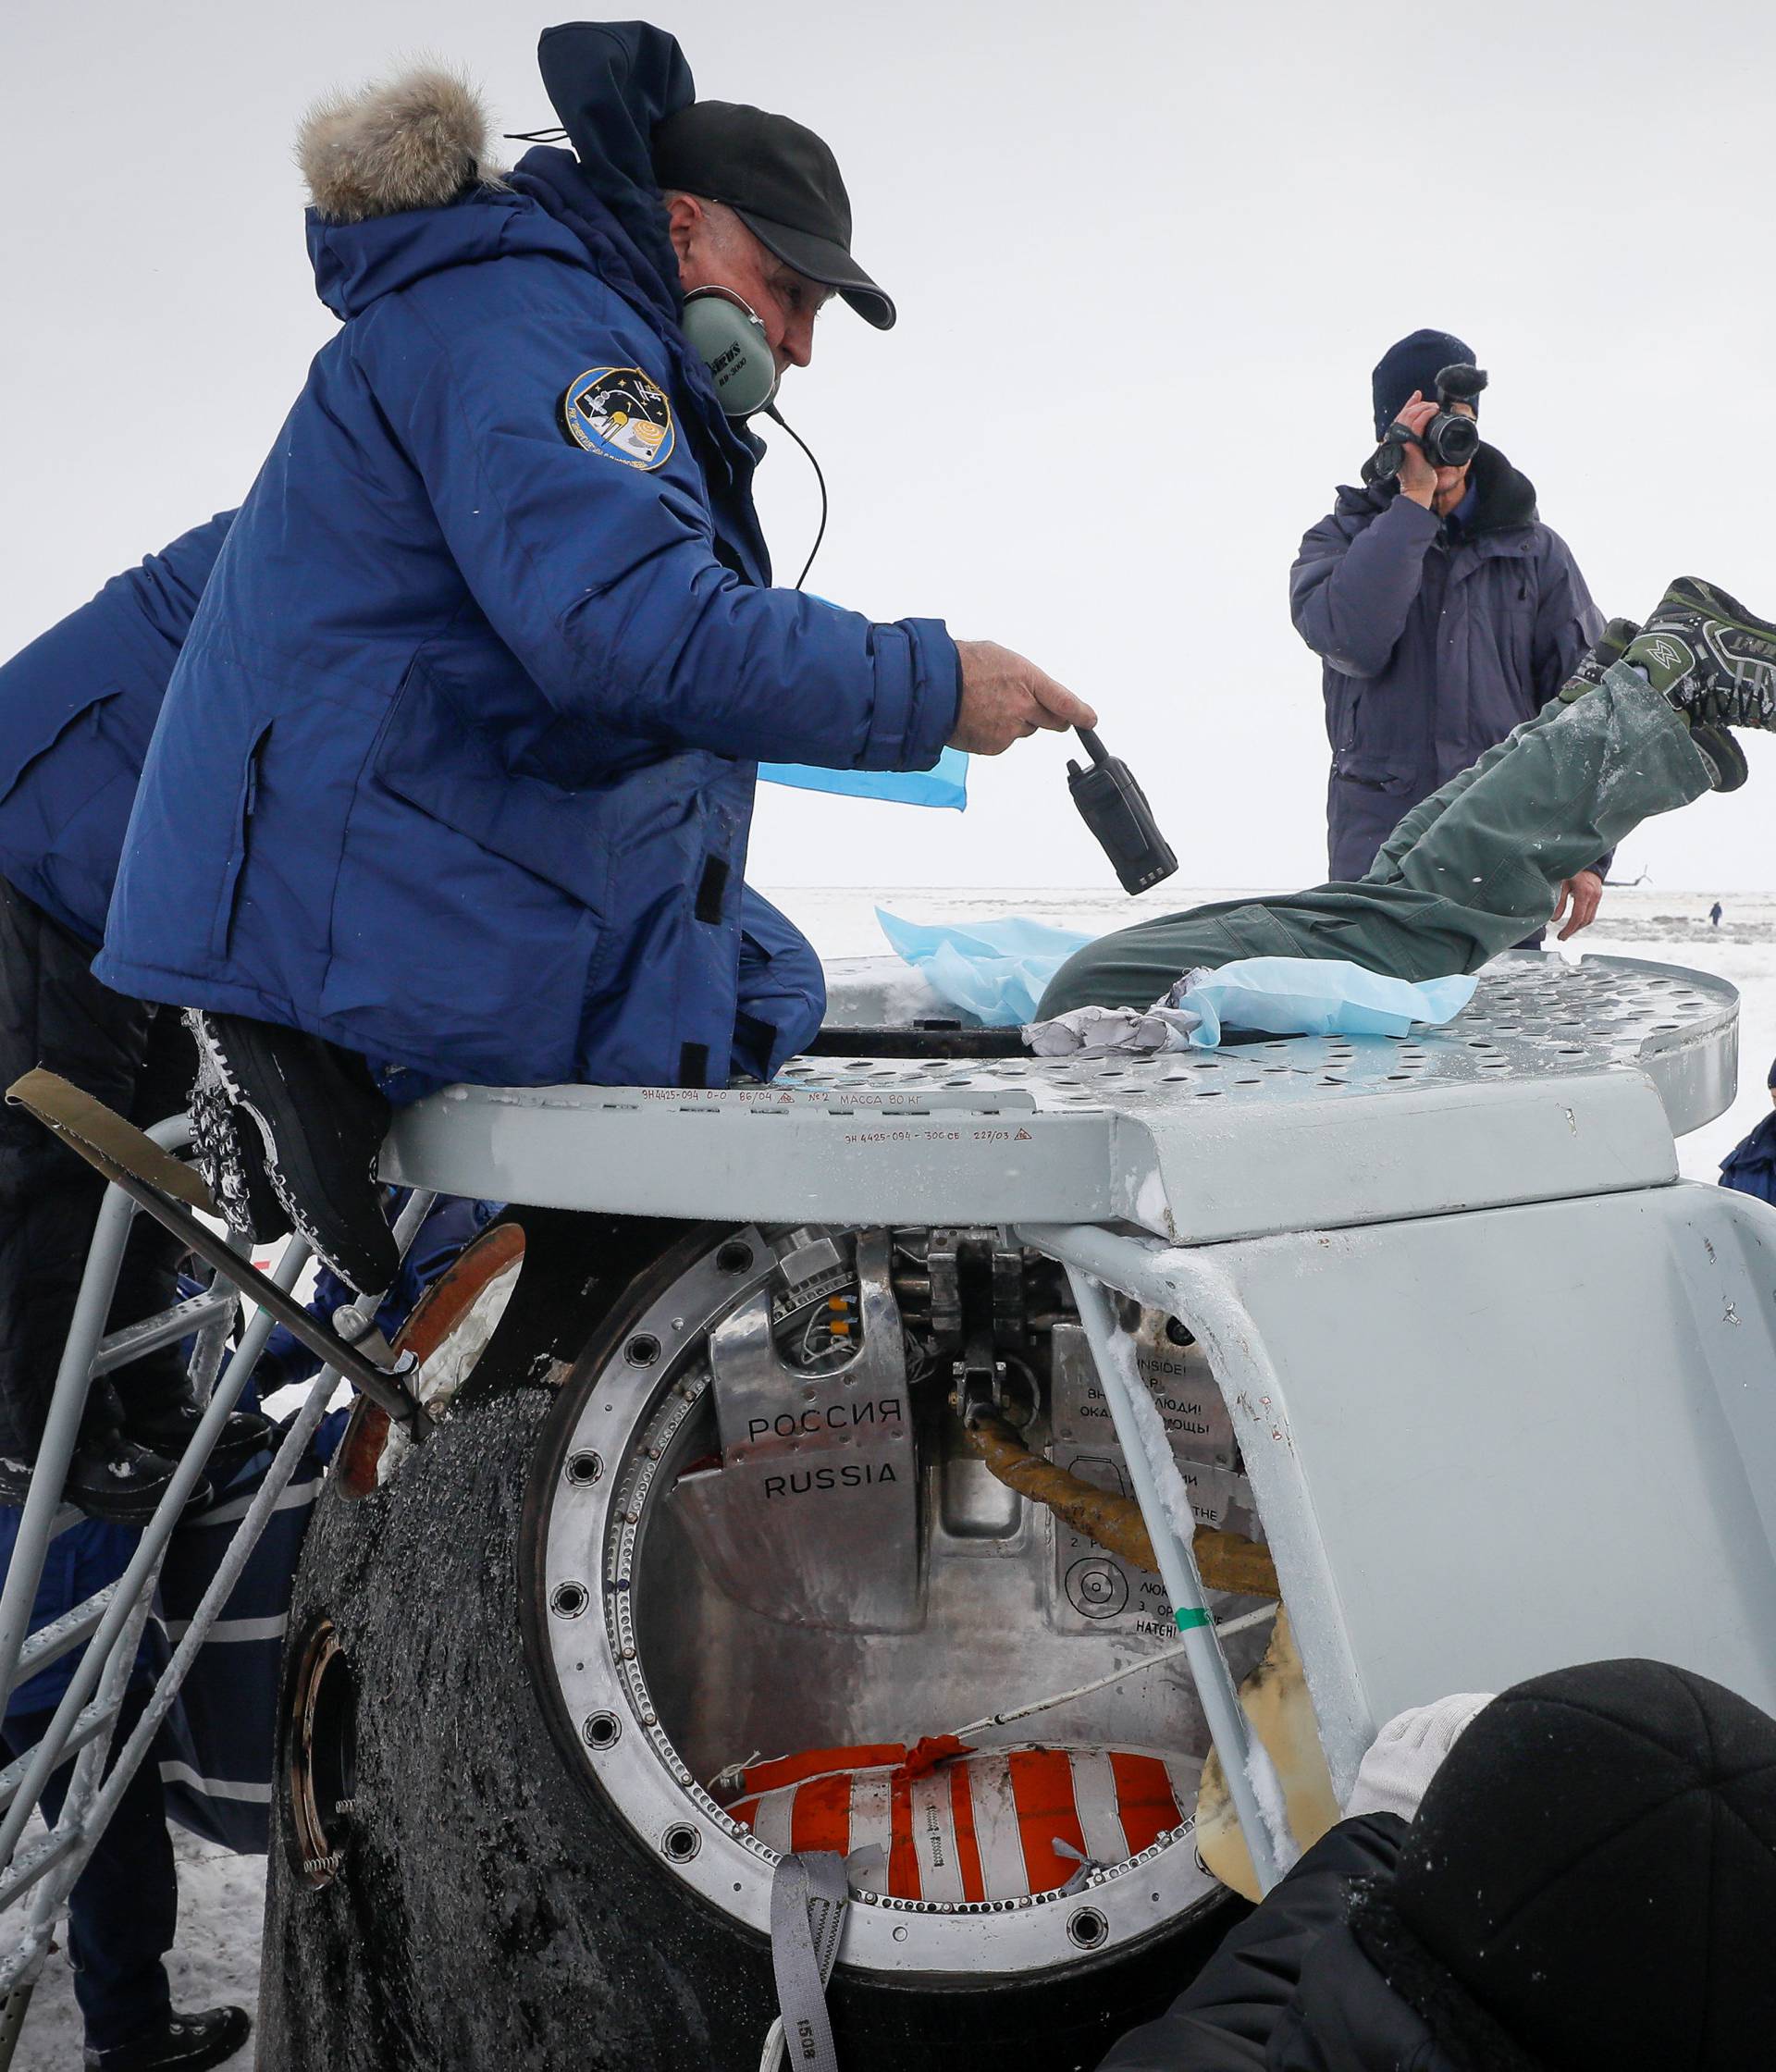 Search and rescue personnel surround the Soyuz MS-09 capsule carrying the International Space Station crew after landing near Zhezkazgan